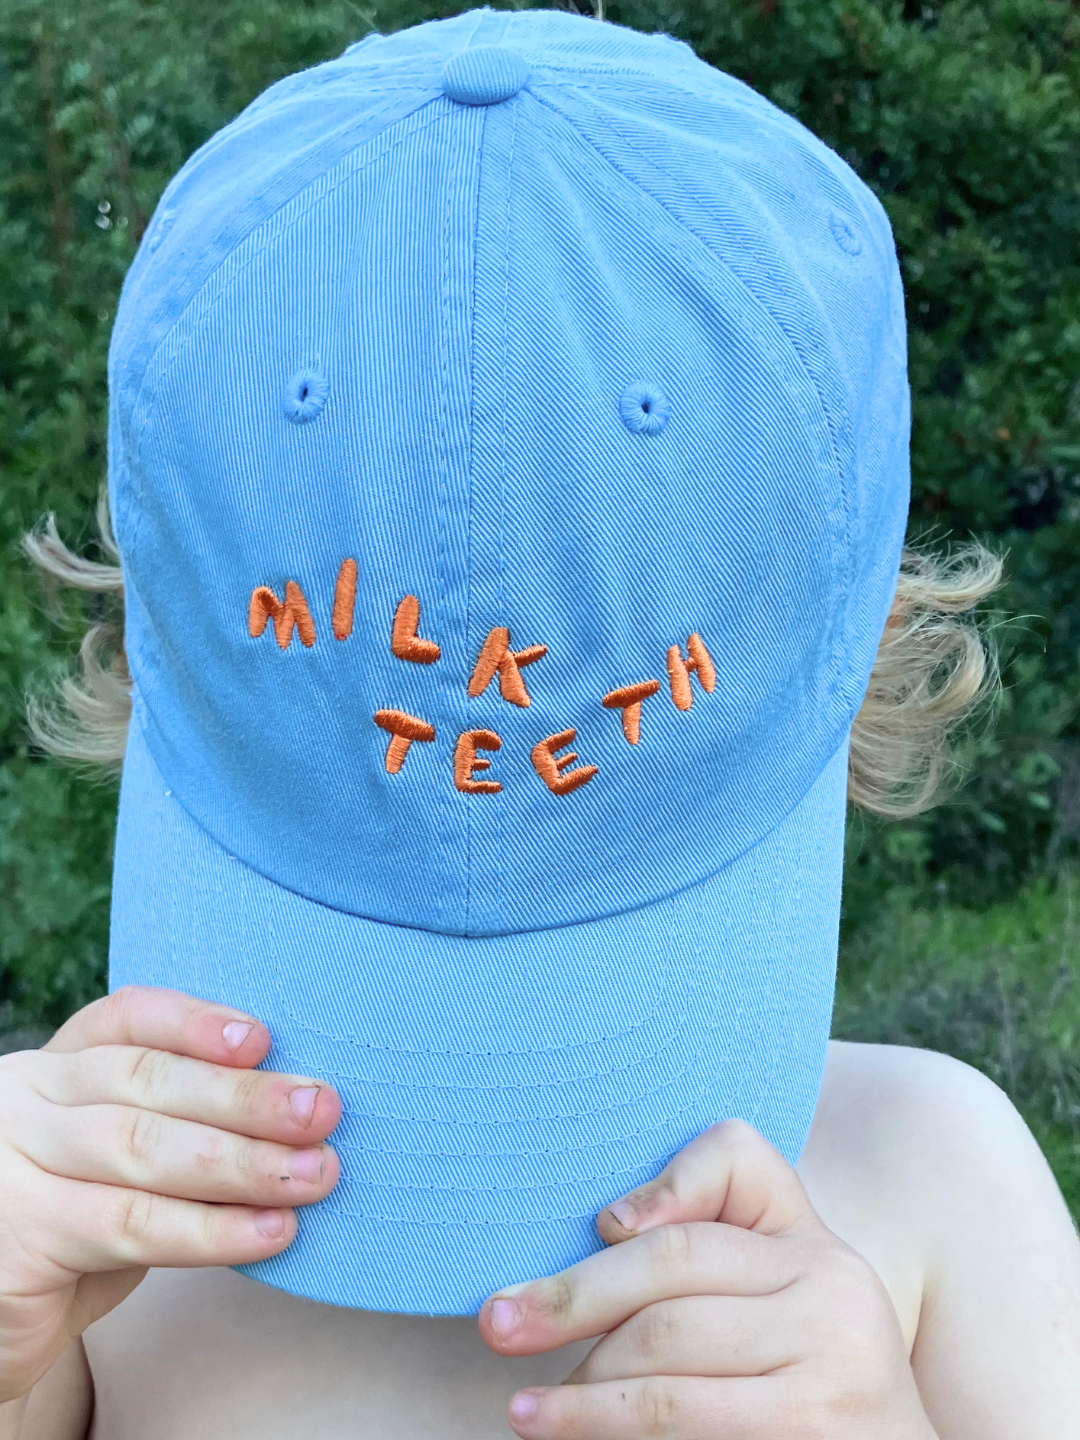 Sky Blue | Child wearing the Milk Teeth embroidery caps in blue wit orange lettering, pulling the hat over their face